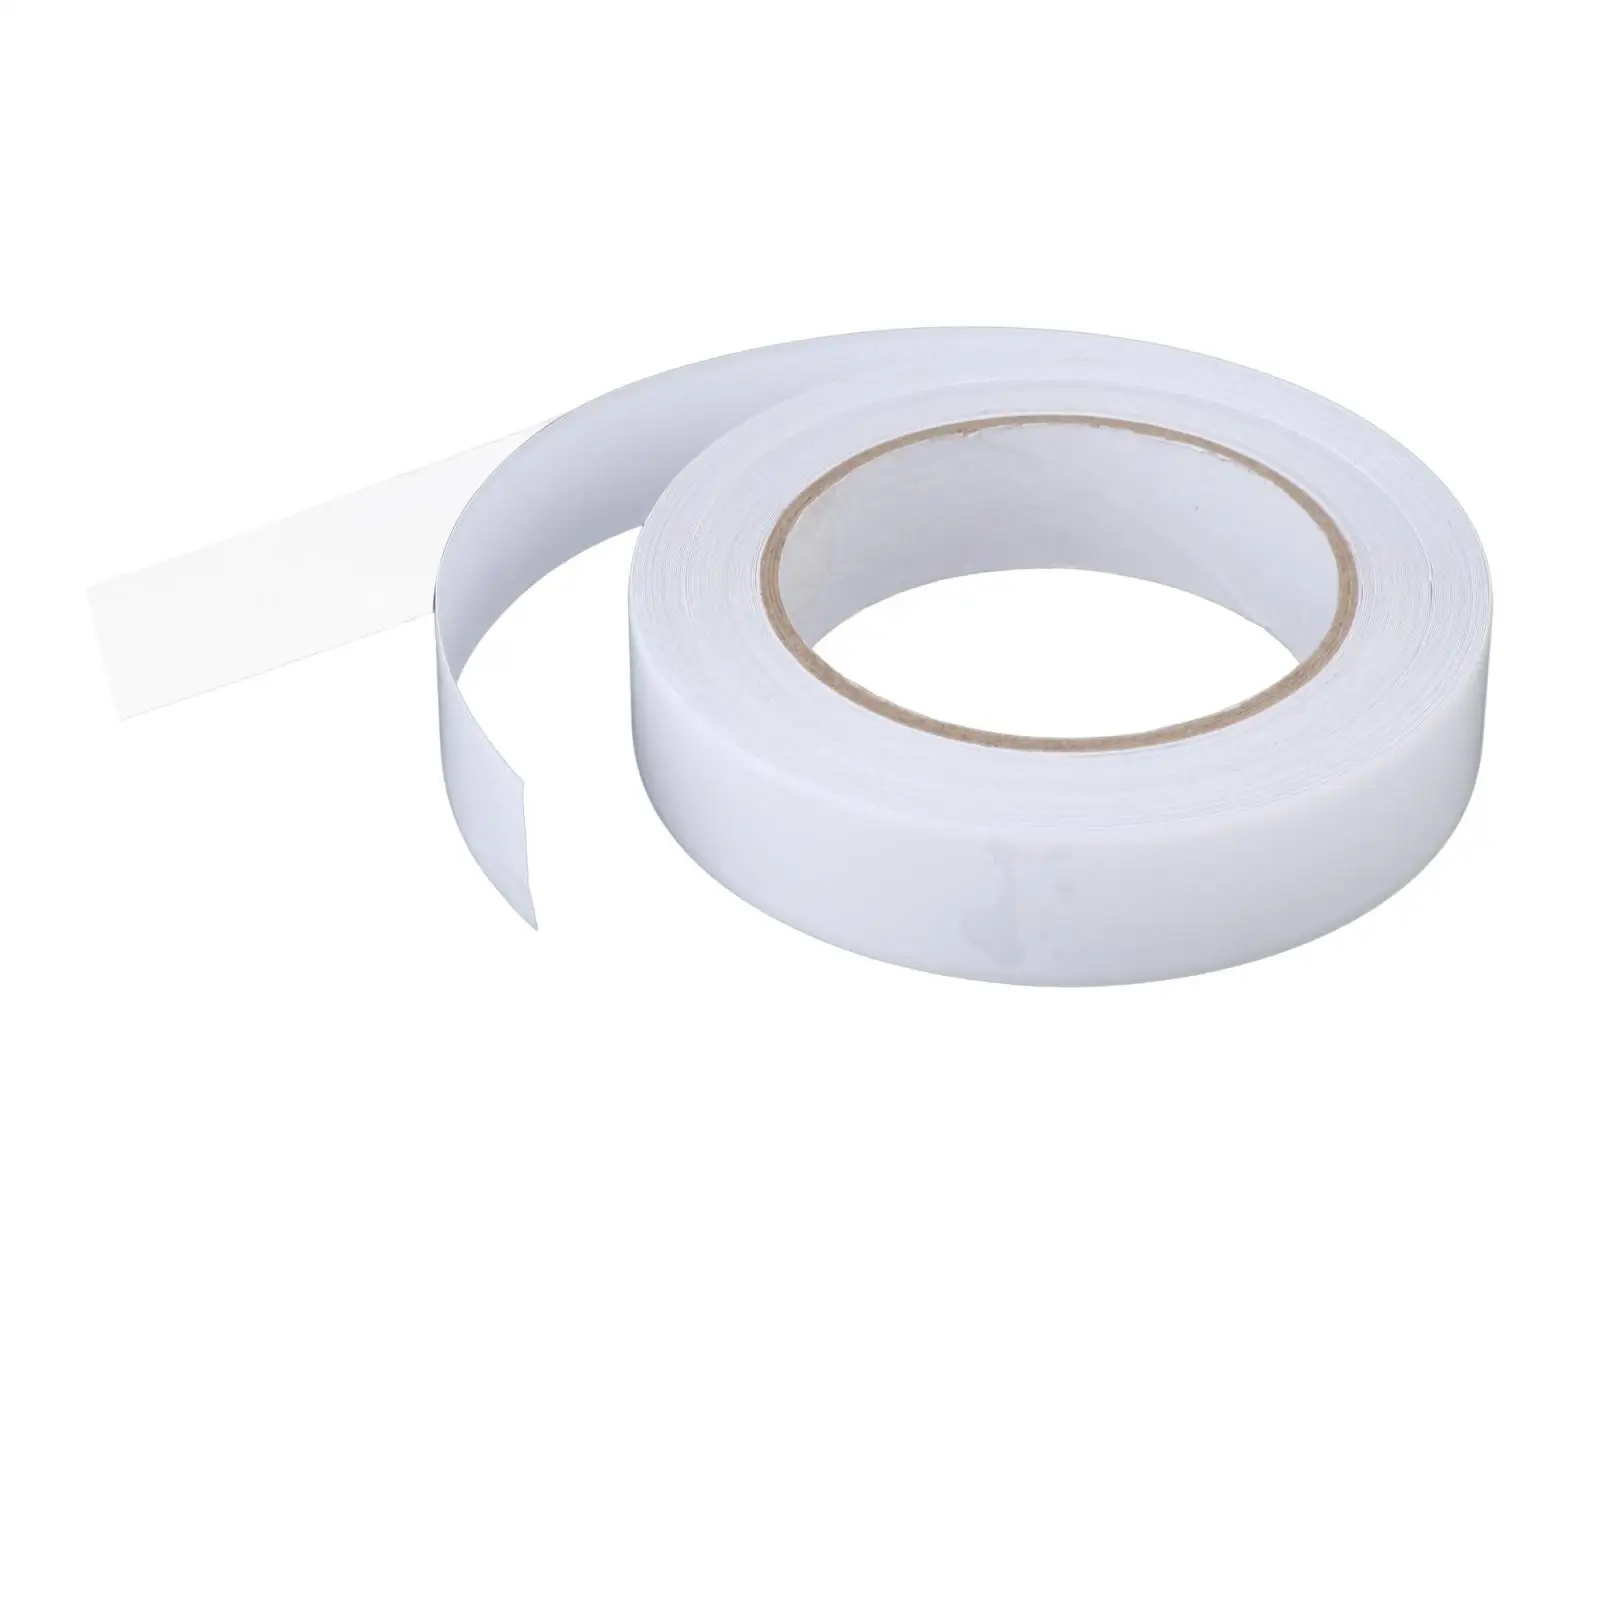 Swimming Rings Repair Tape Camping Tent Cover Patch Waterproof Awning Swimming Pool Patch for Inflatable Boat Trampoline Air Bed